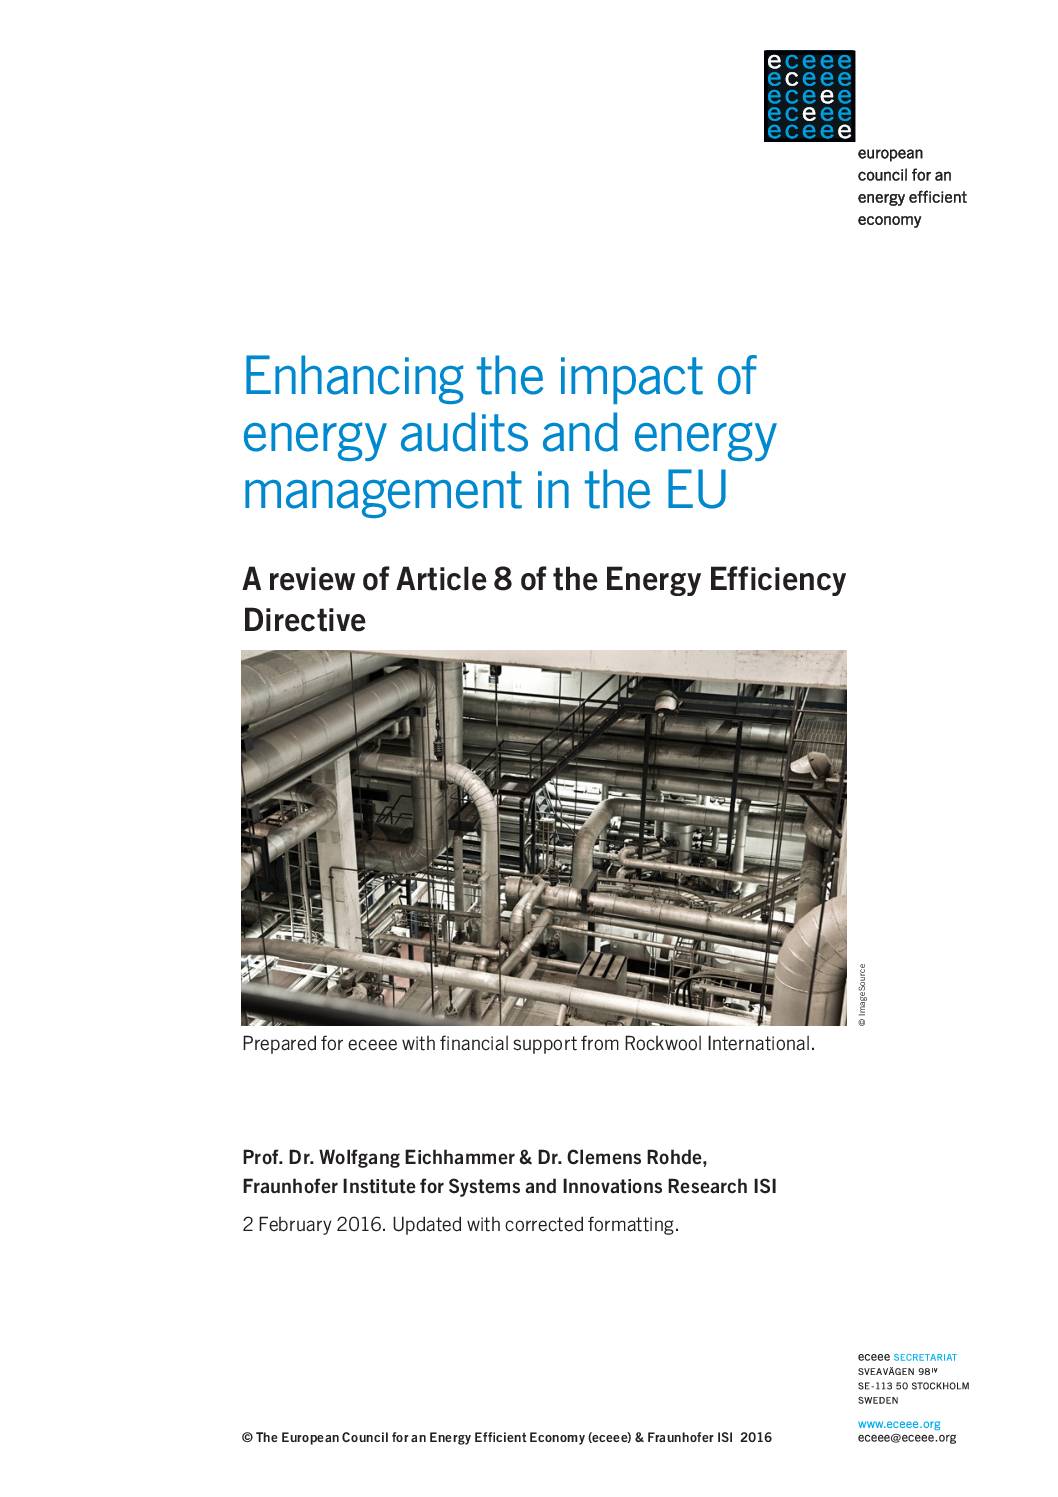 Enhancing the impact of energy audits and energy management in the EU: A review of Article 8 of the Energy Efficiency Directive